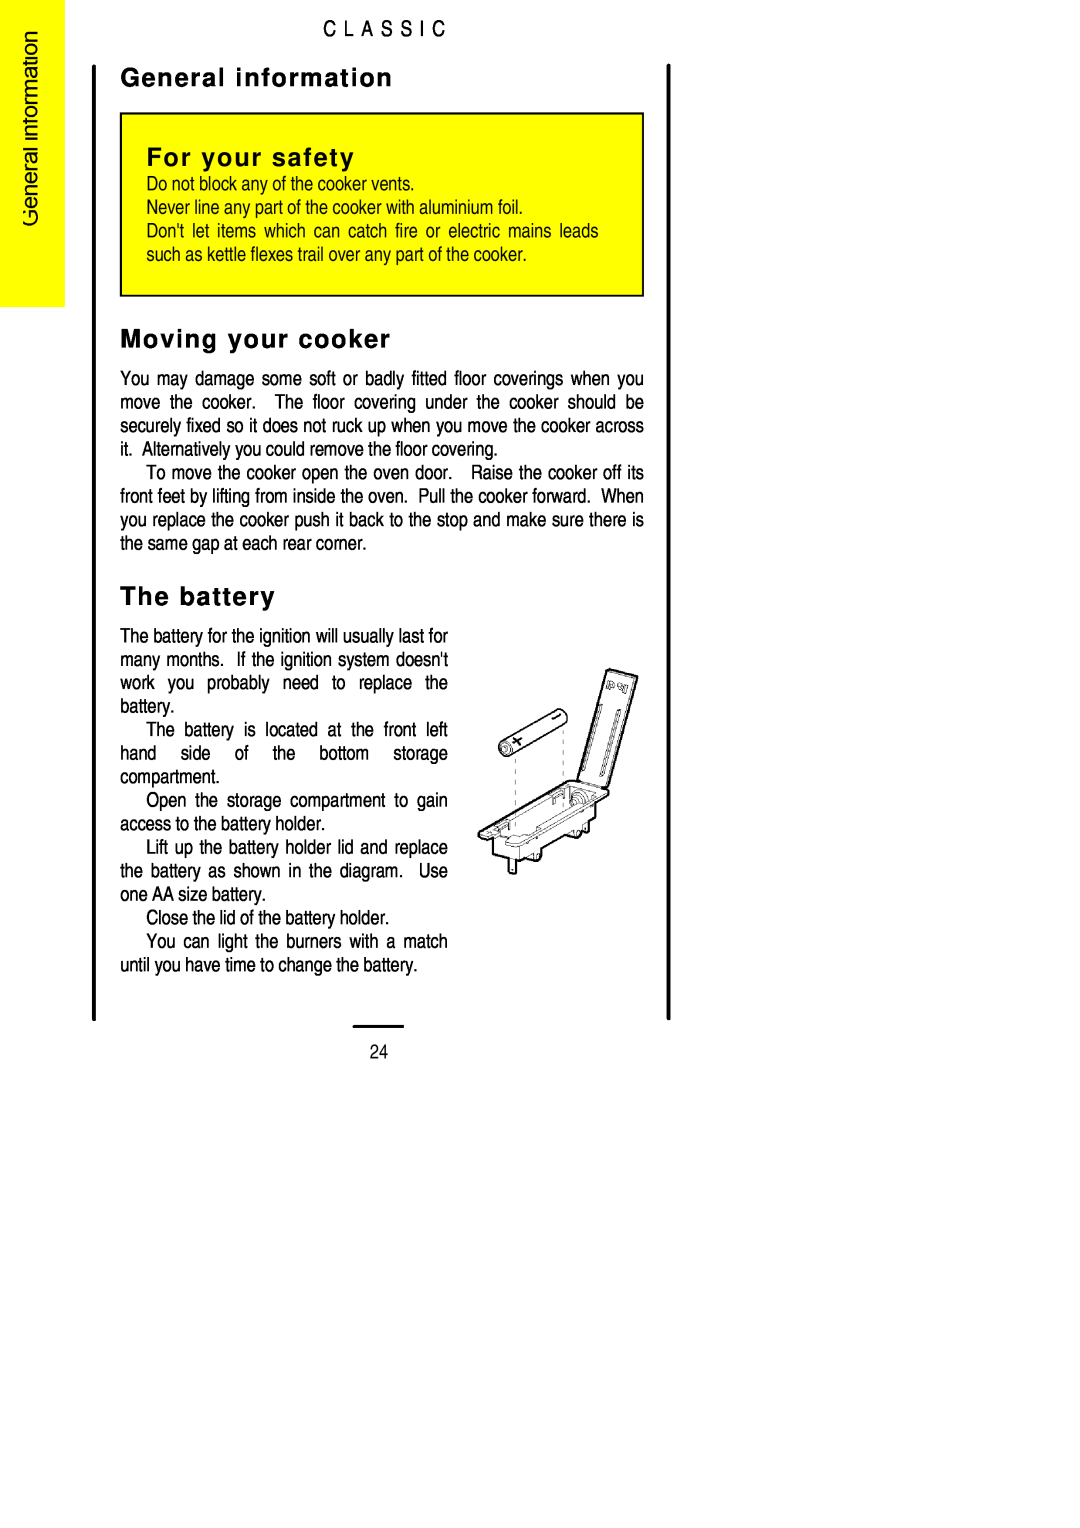 Parkinson Cowan U02021 General information For your safety, Moving your cooker, The battery, C L A S S I C 